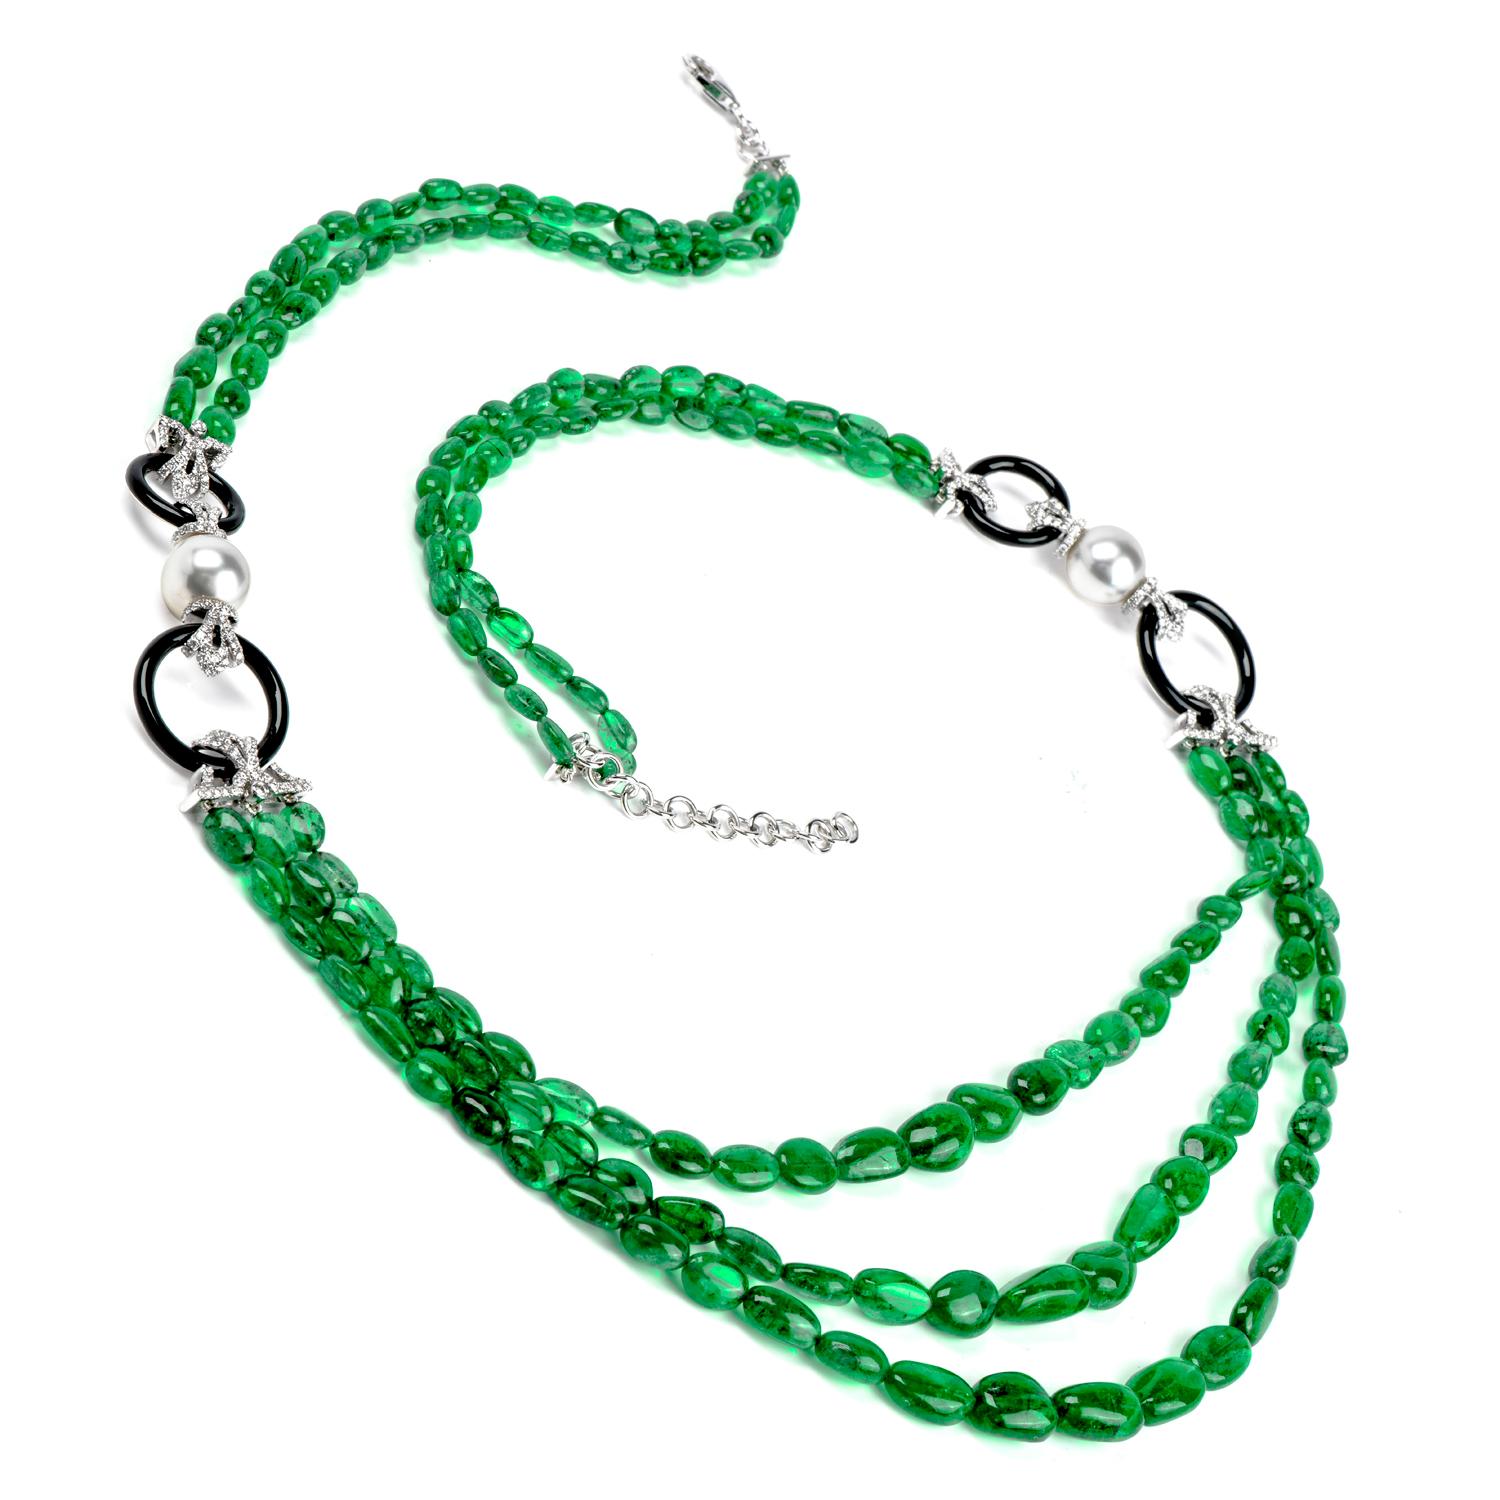 Fell the prestige of this glamorous and elegant Diamond Emerald Pearl & Onyx 18K Gold Multistrand Bead Necklace!  This

beautiful necklace is crafted in 18-karat white gold, with a lobster clasp and adjustable links for length variation. 